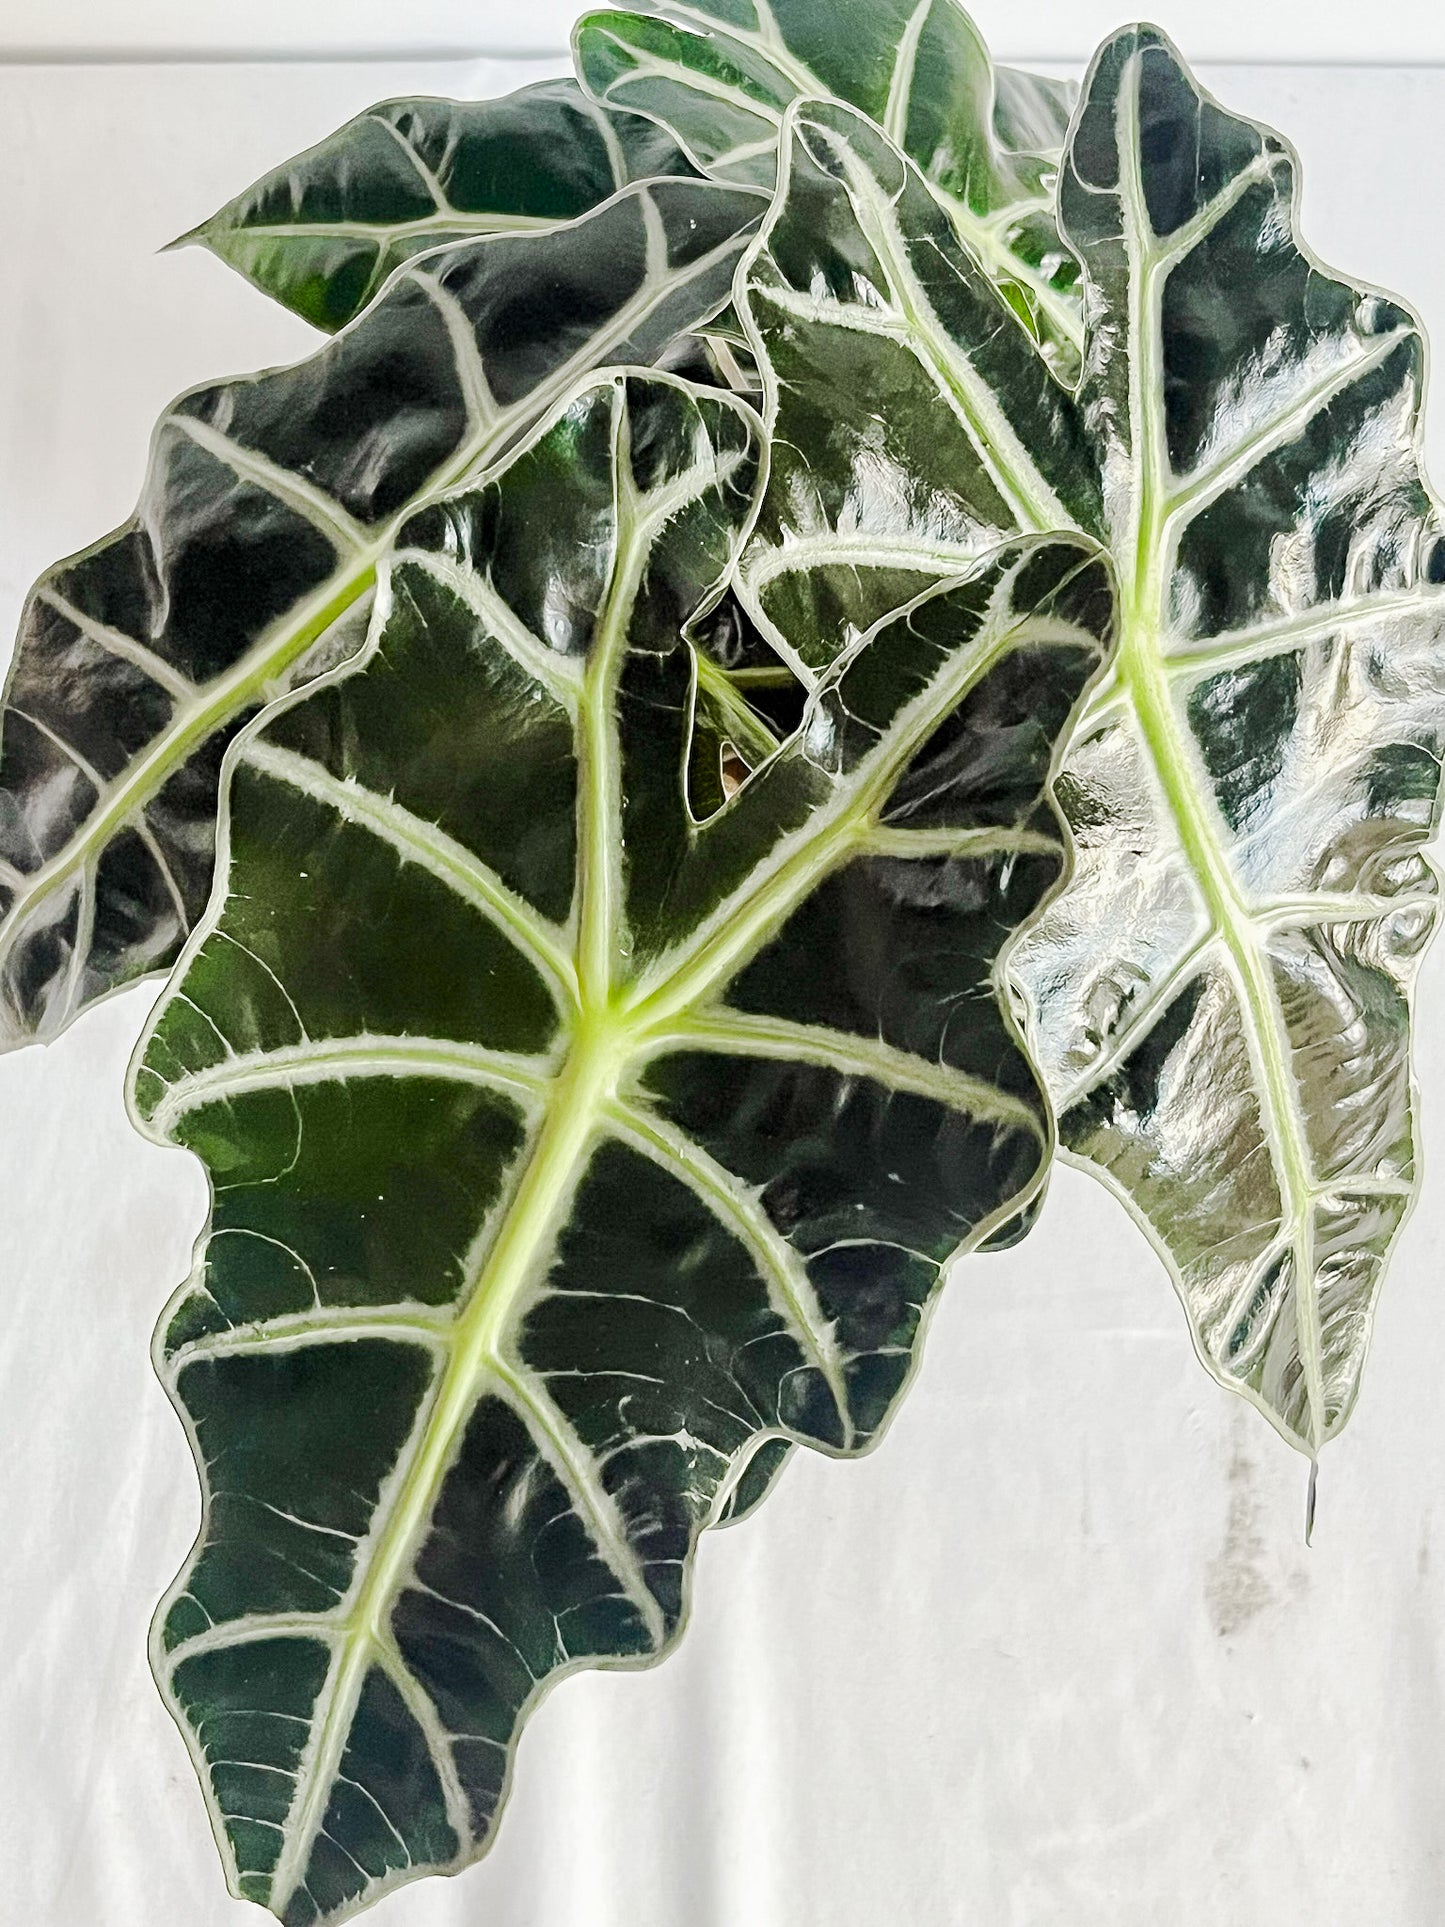 Alocasia Polly 'African Mask' Plant